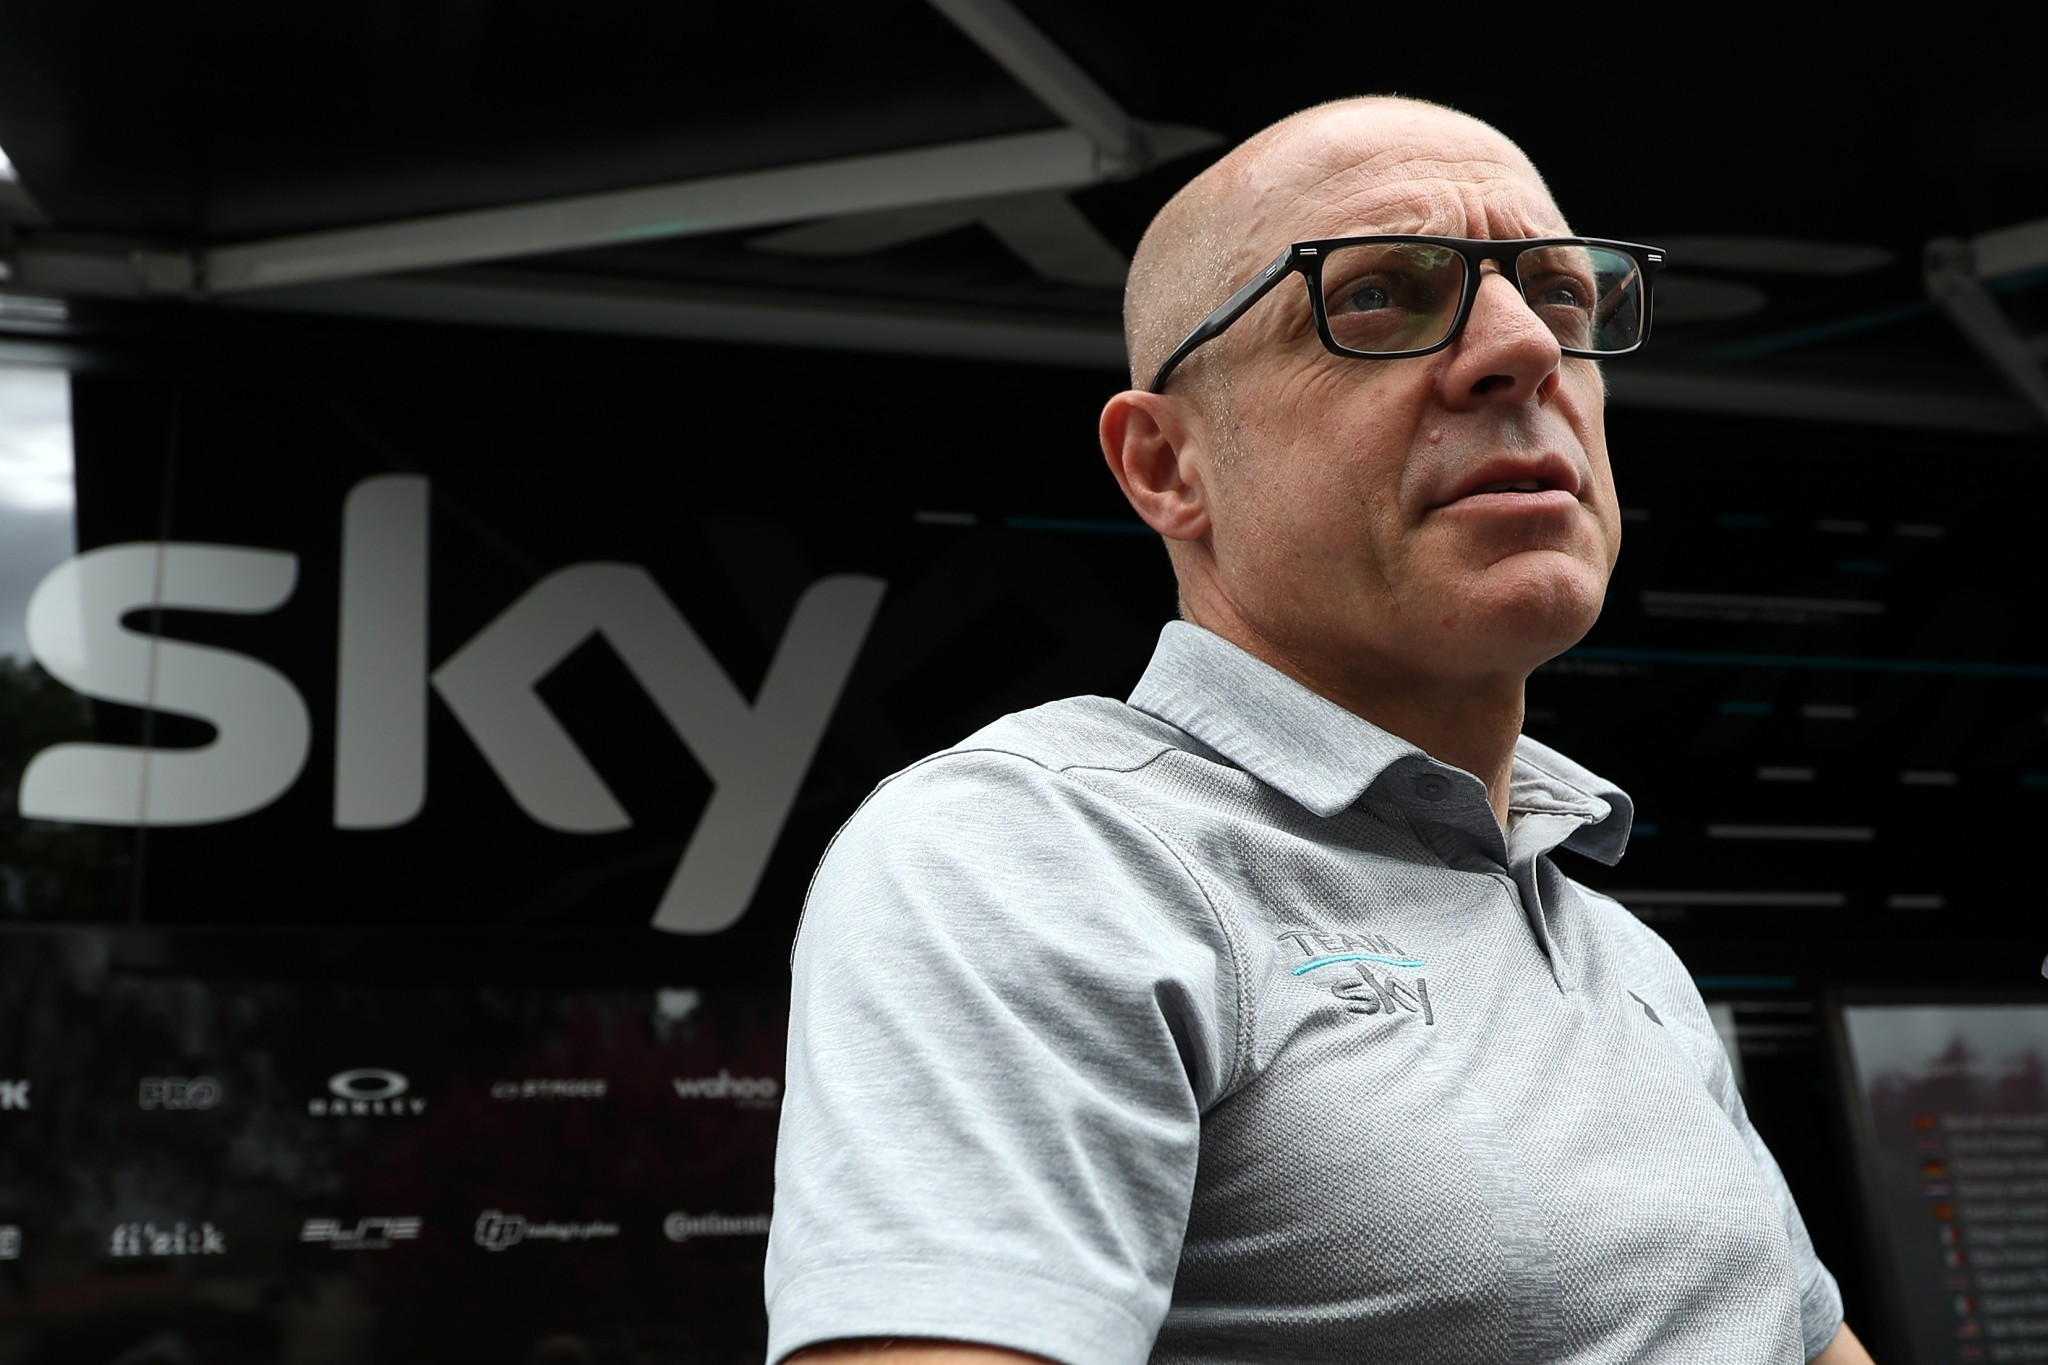 Matteo Tosatto discussed the position with Team Sky principal Sir Dave Brailsford, pictured,  at the Giro d’Italia in May ©Getty Images